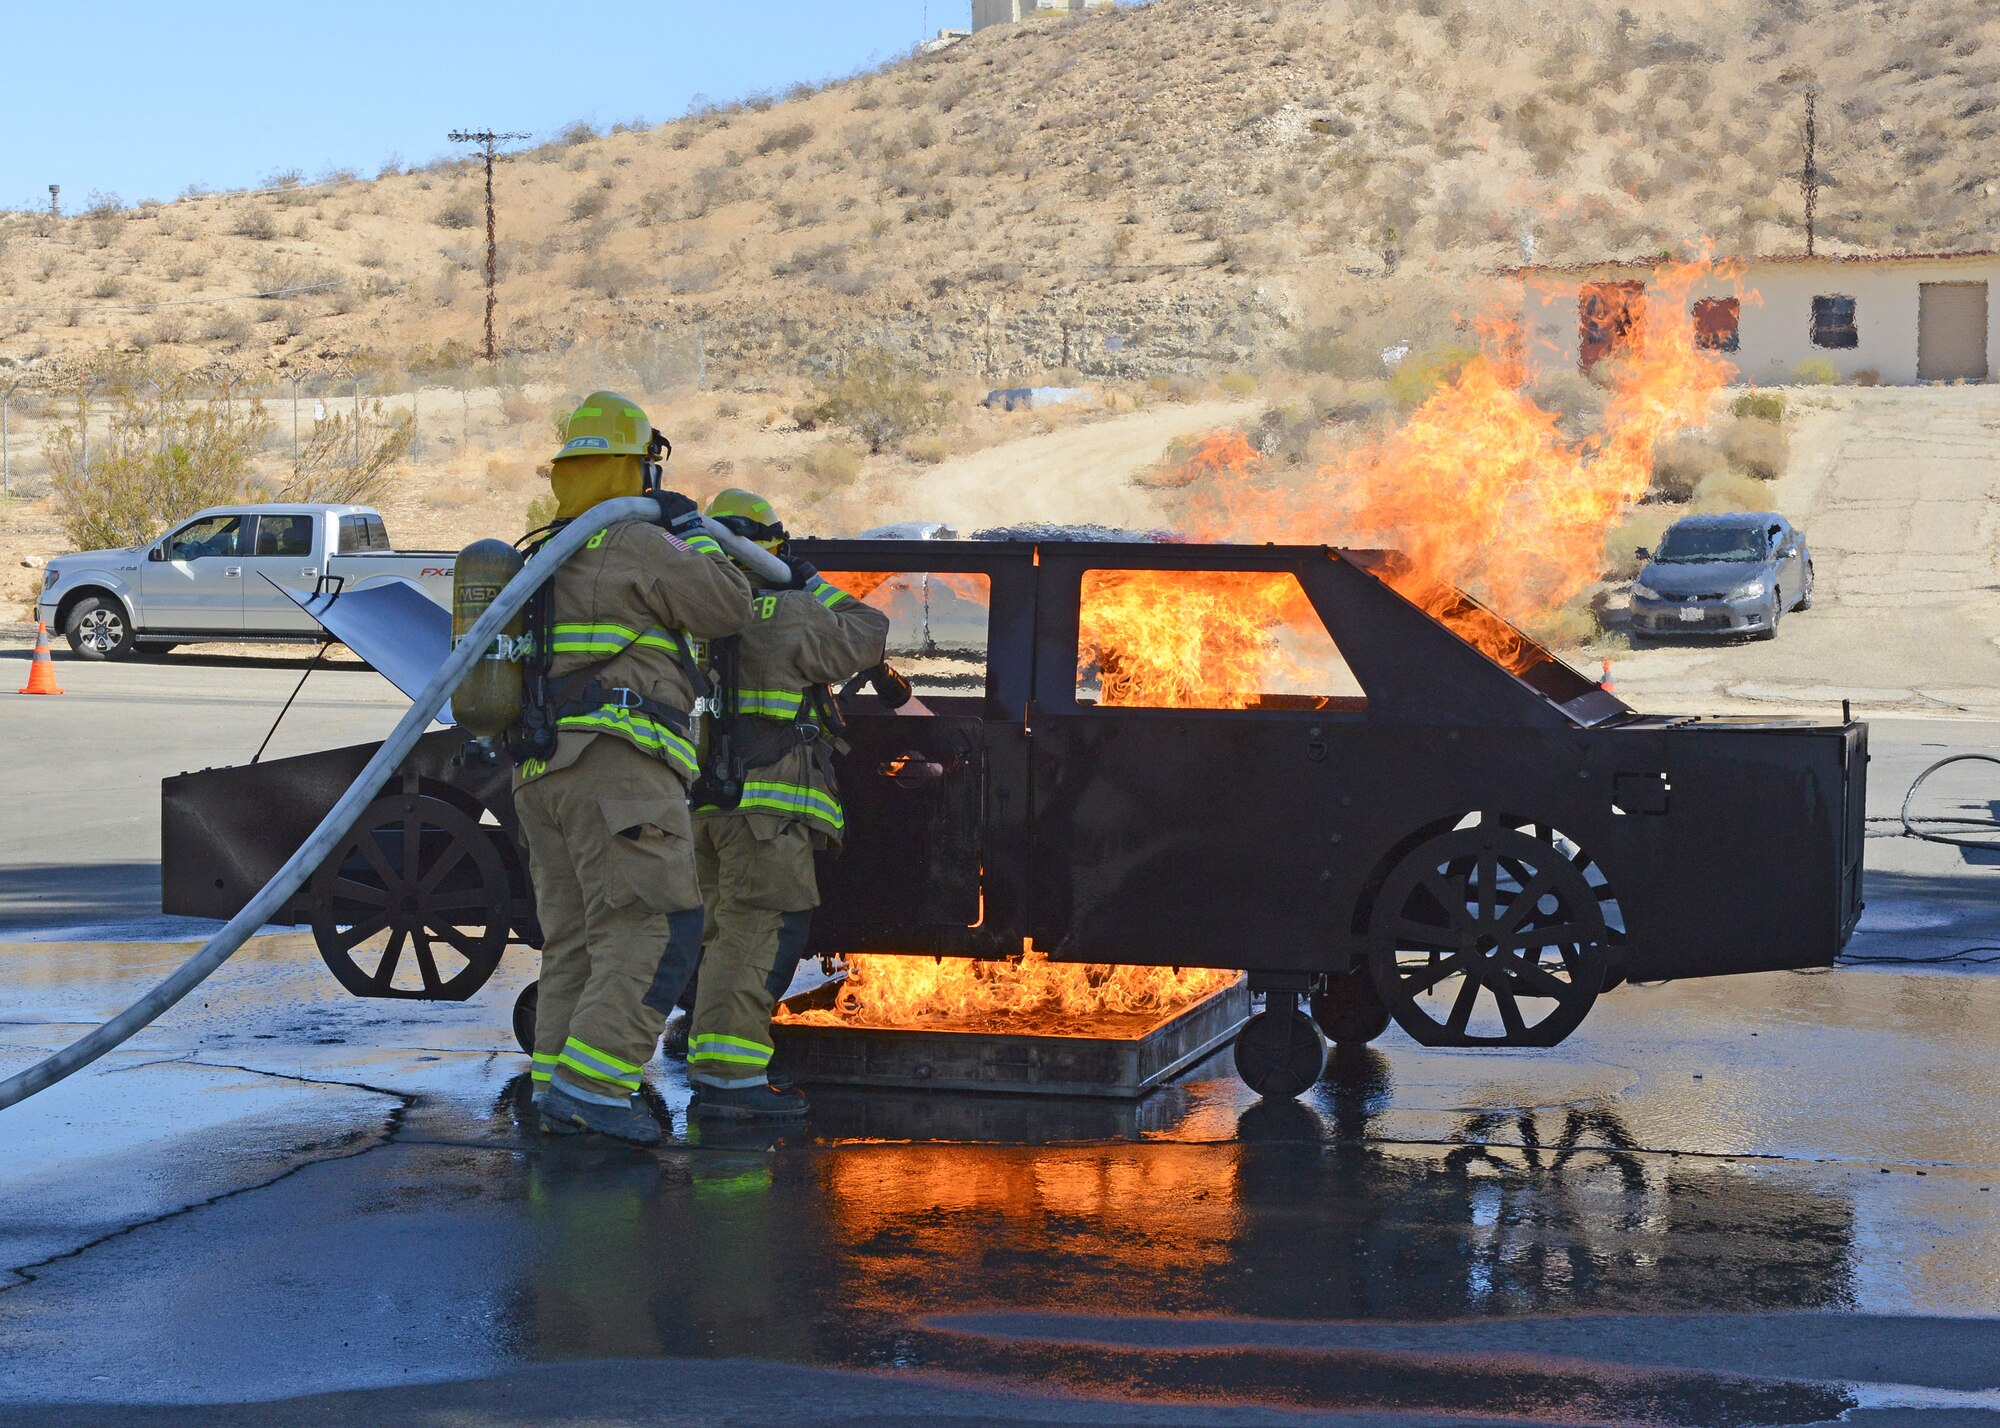 Edwards AFB fire fighters demonstrate how they would put out a car fire during an open house at Fire Station #4 at the Air Force Research Laboratory Detachment 7, Oct. 11. (U.S. Air Force photo by Kenji Thuloweit)